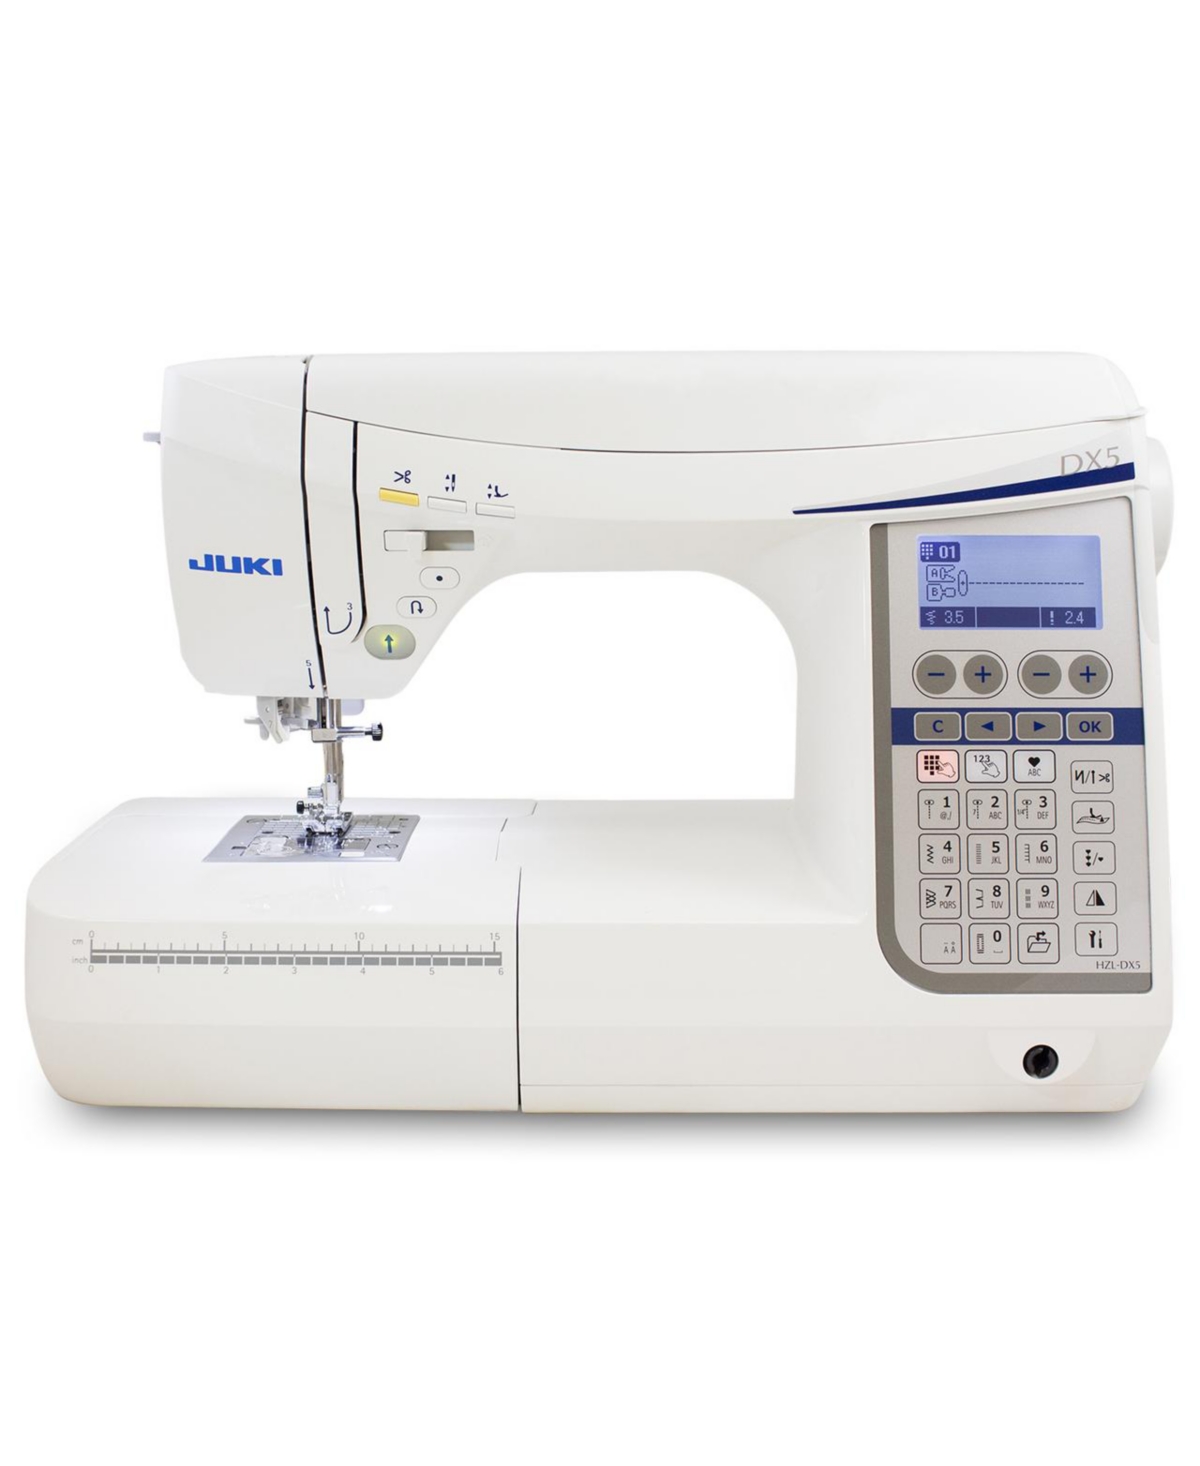 Hzl-DX5 Computerized Sewing and Quilting Machine - White